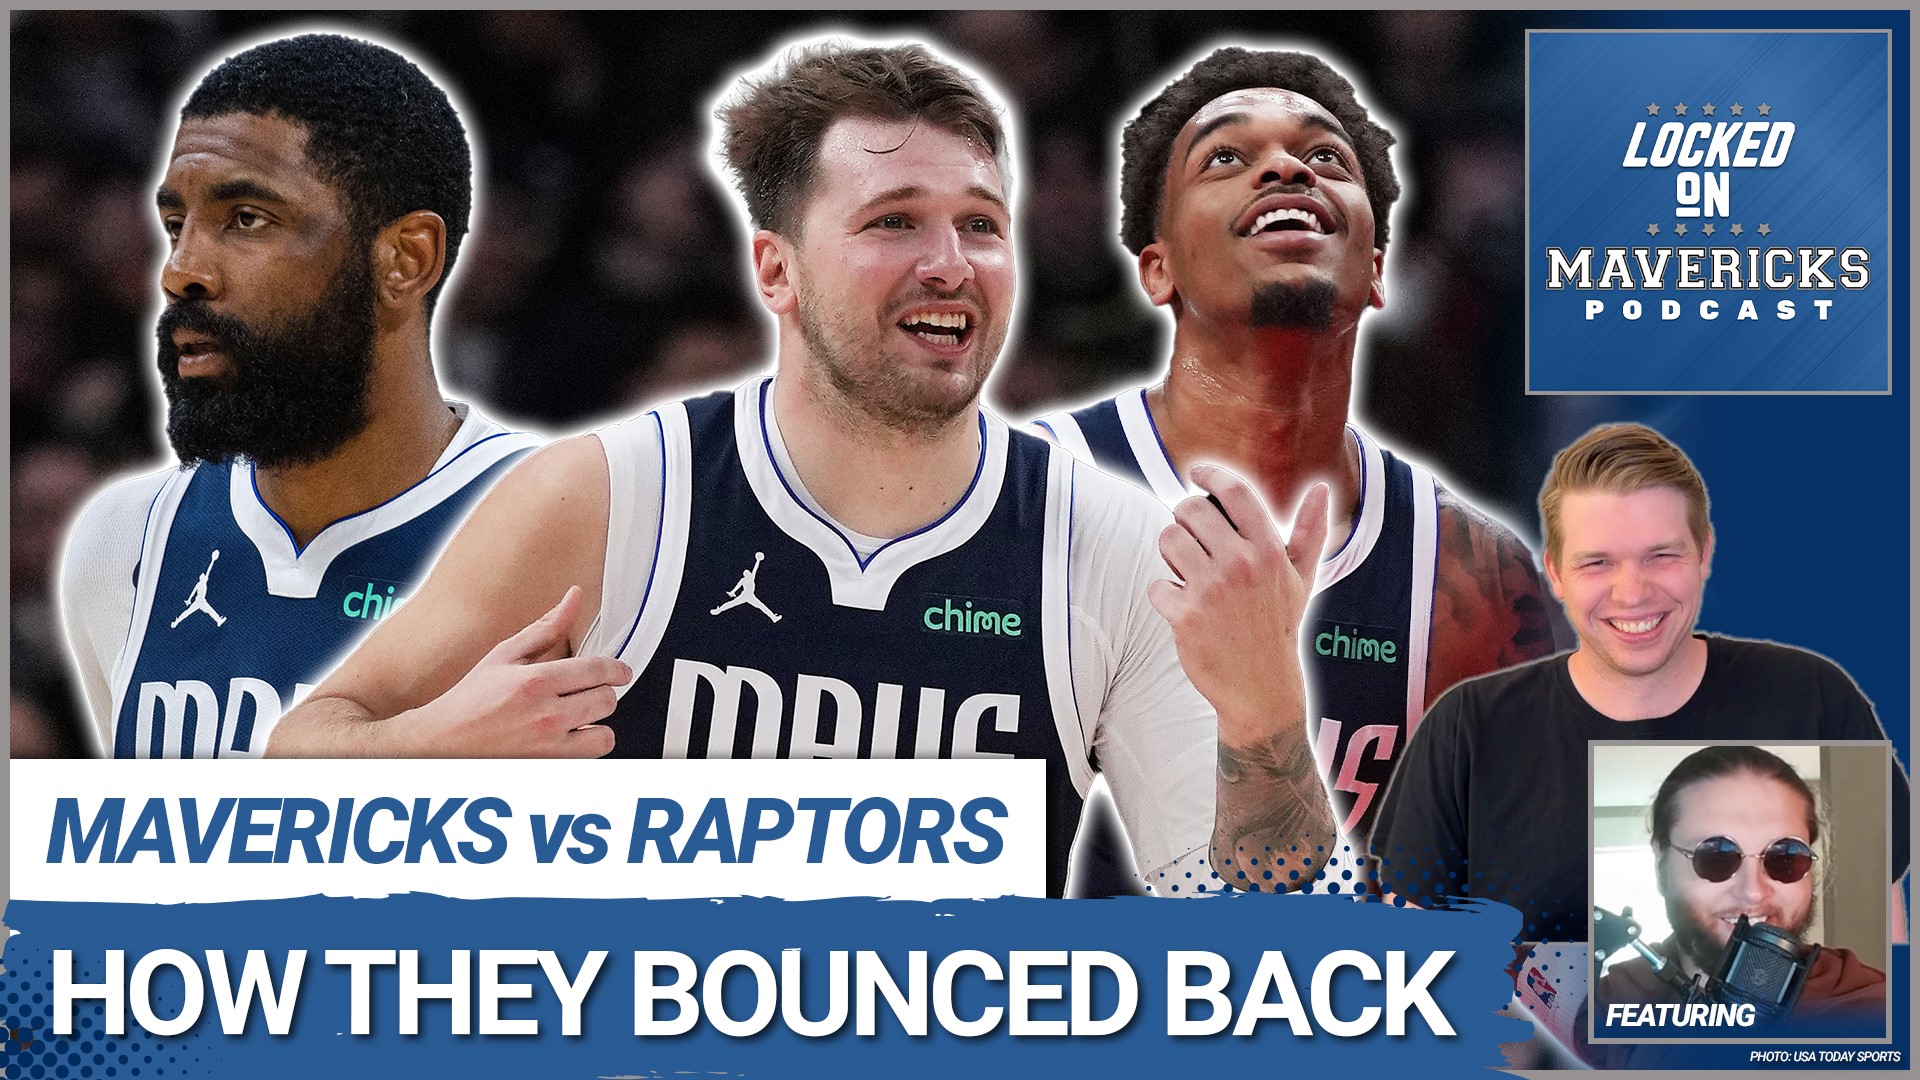 Nick Angstadt & Slightly Biased breakdown the Dallas Mavericks' win vs the Toronto Raptors, how Luka Doncic led a run, Kyrie Irving owned the 4th, and more.